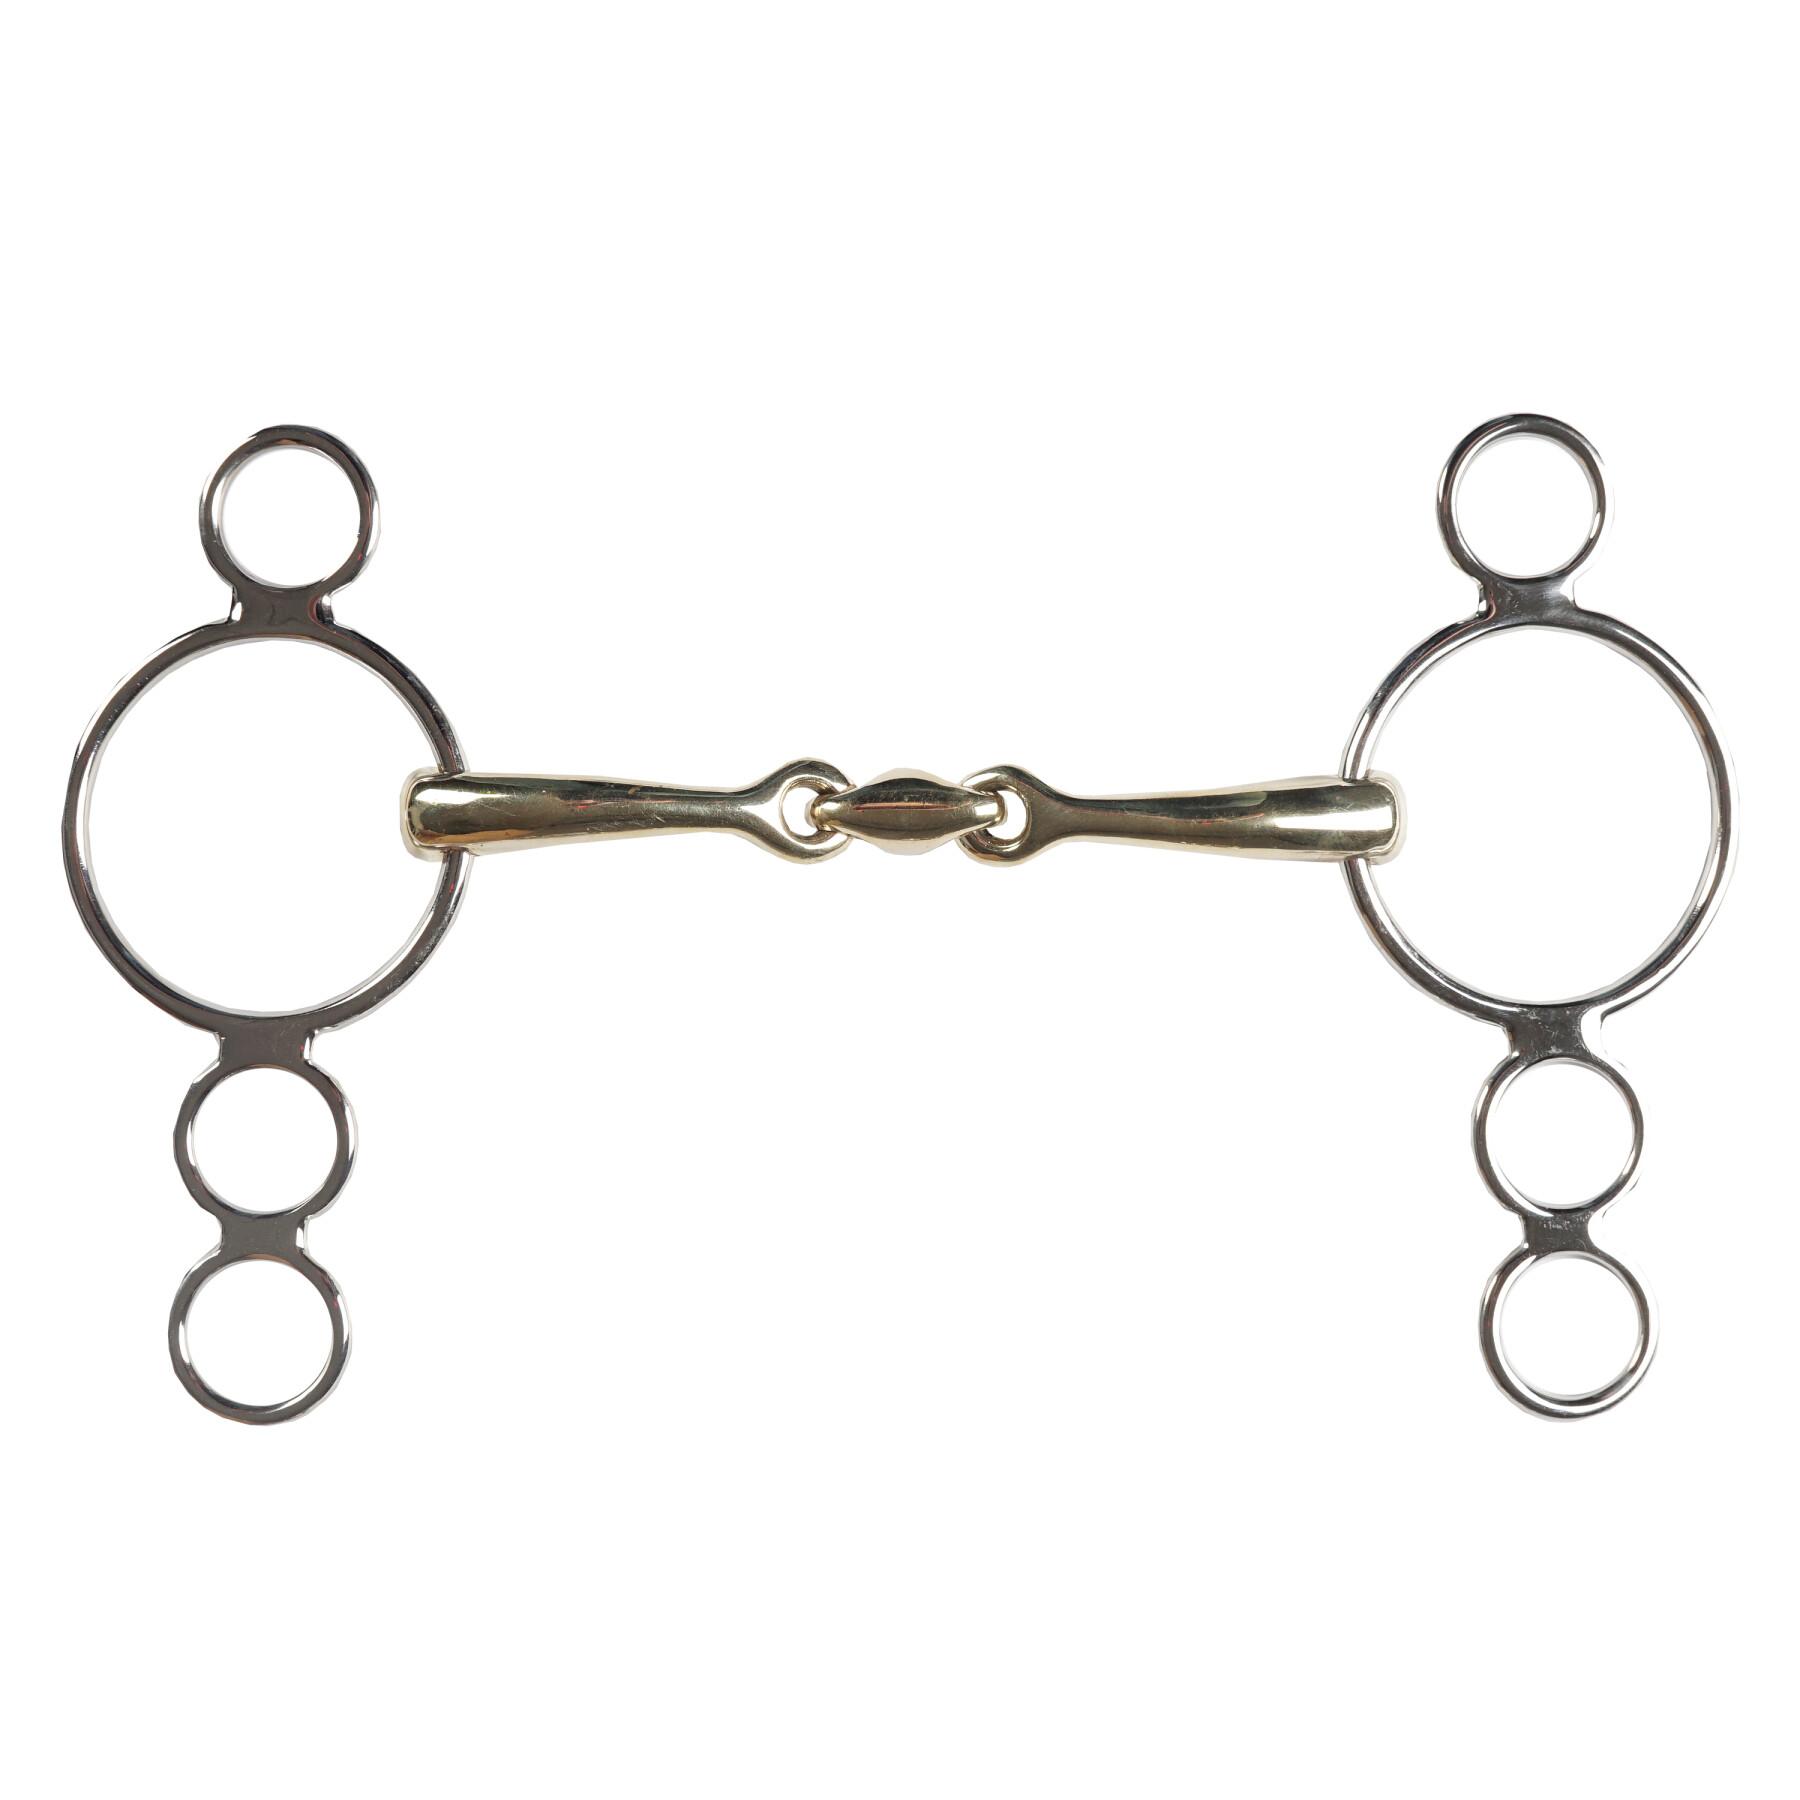 3 ring pessoa bit for double-jointed horses Horka